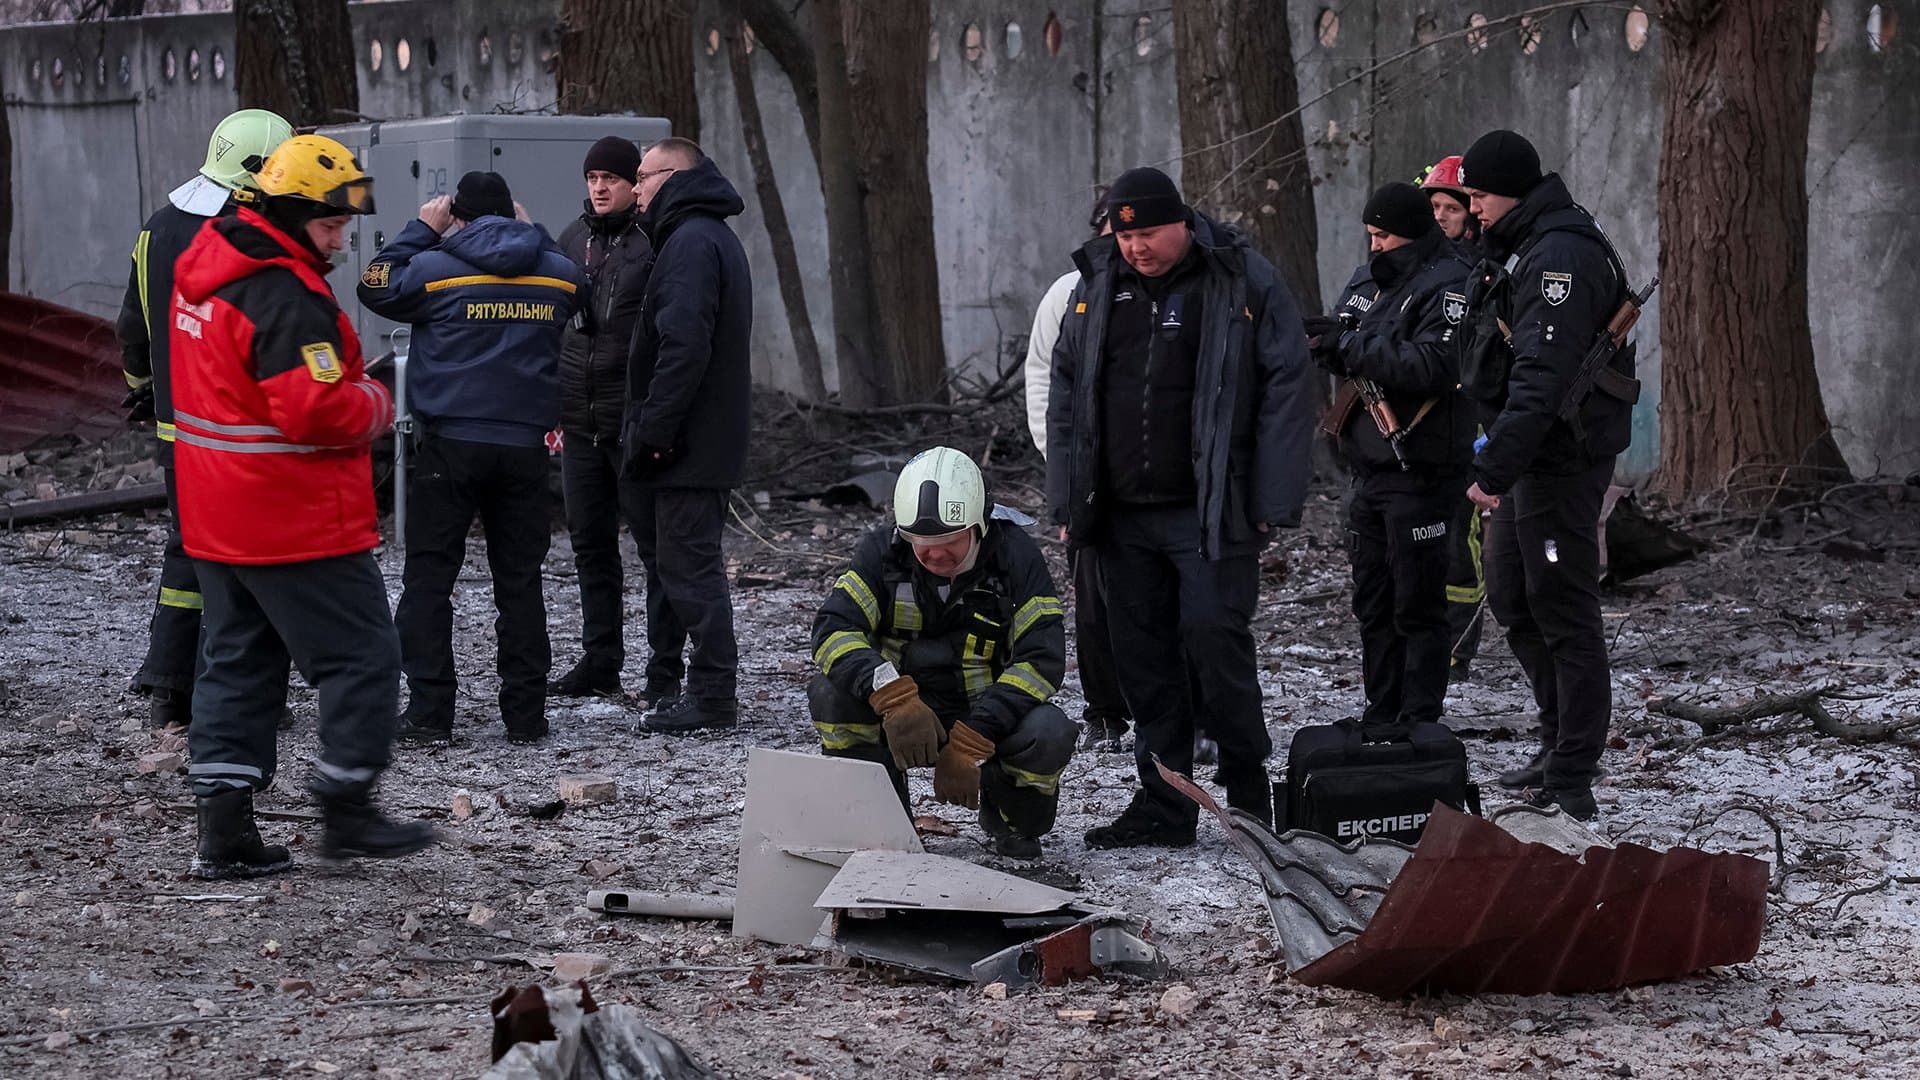 Emergency services and police officers examine parts of a drone at the site of a building destroyed by a Russian drone attack in Kyiv